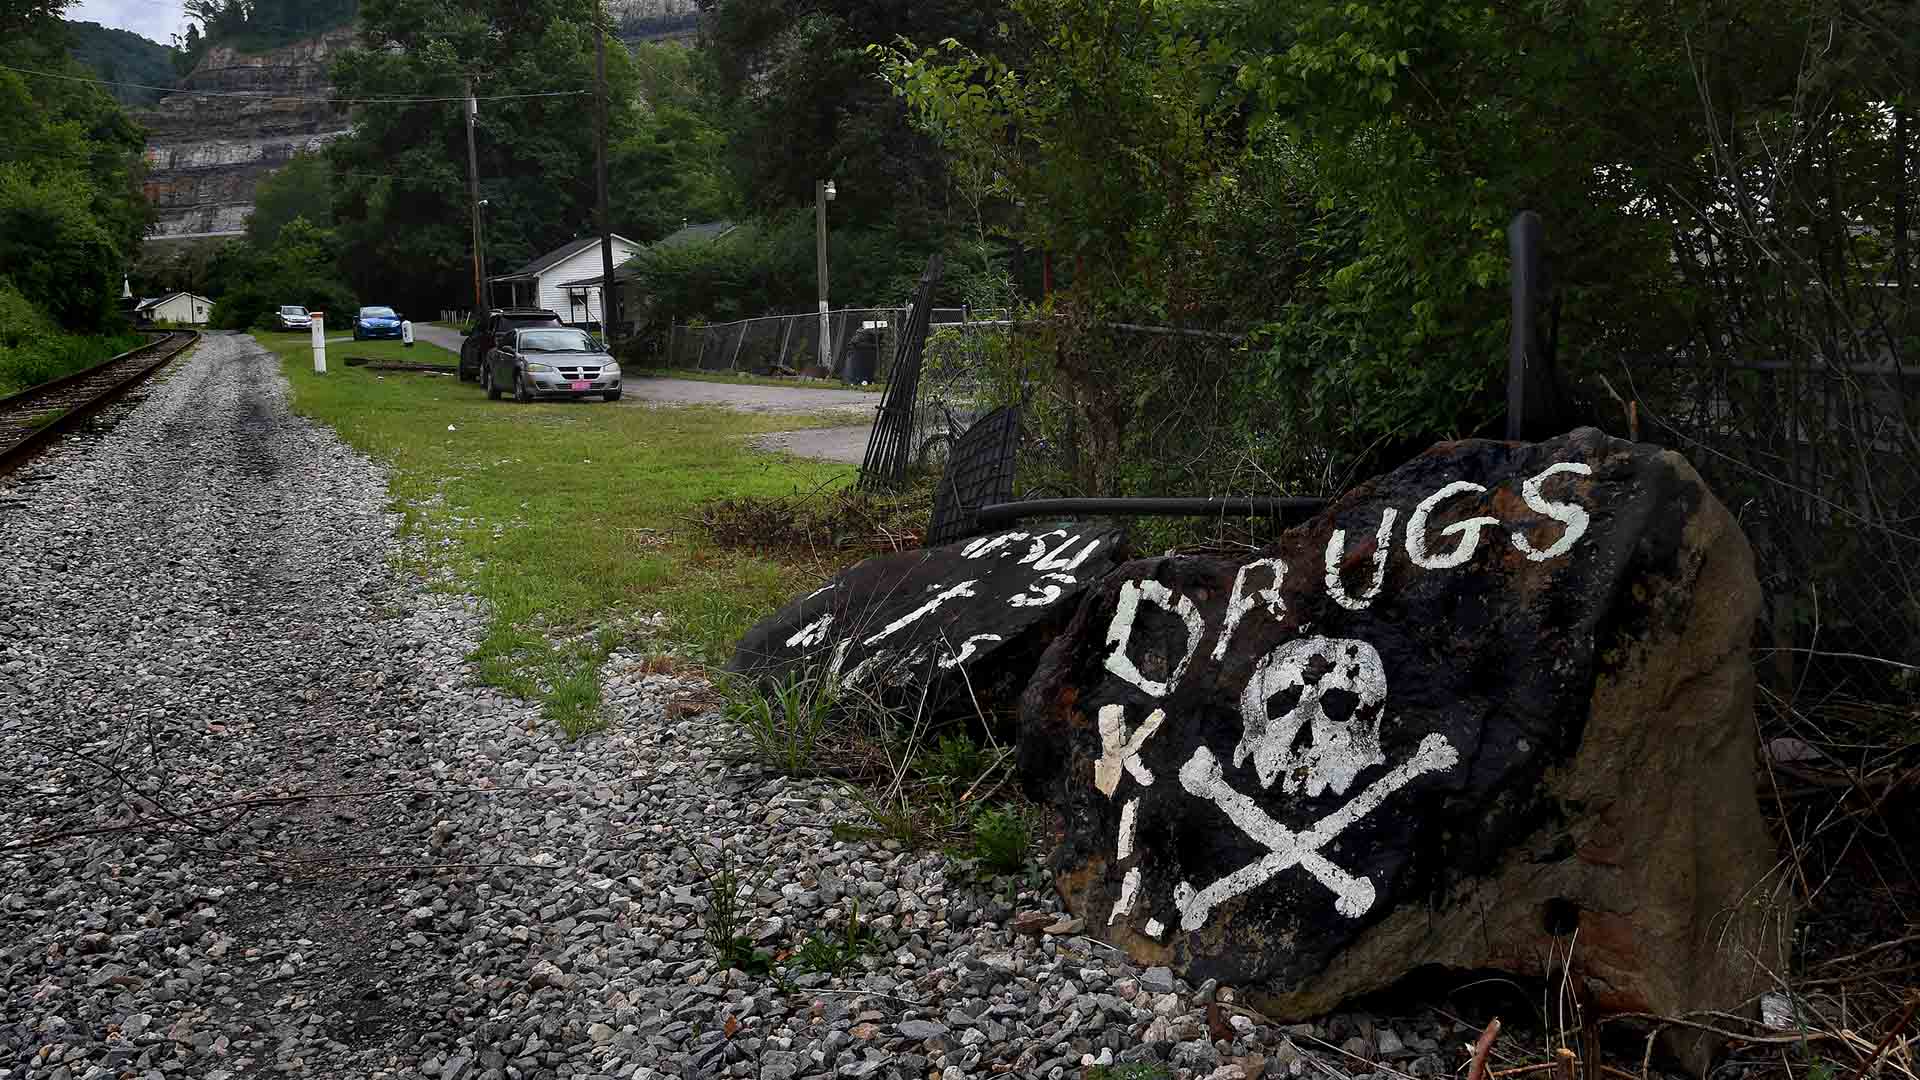 An ominous sign painted on some rocks in Logan County, West Virginia.